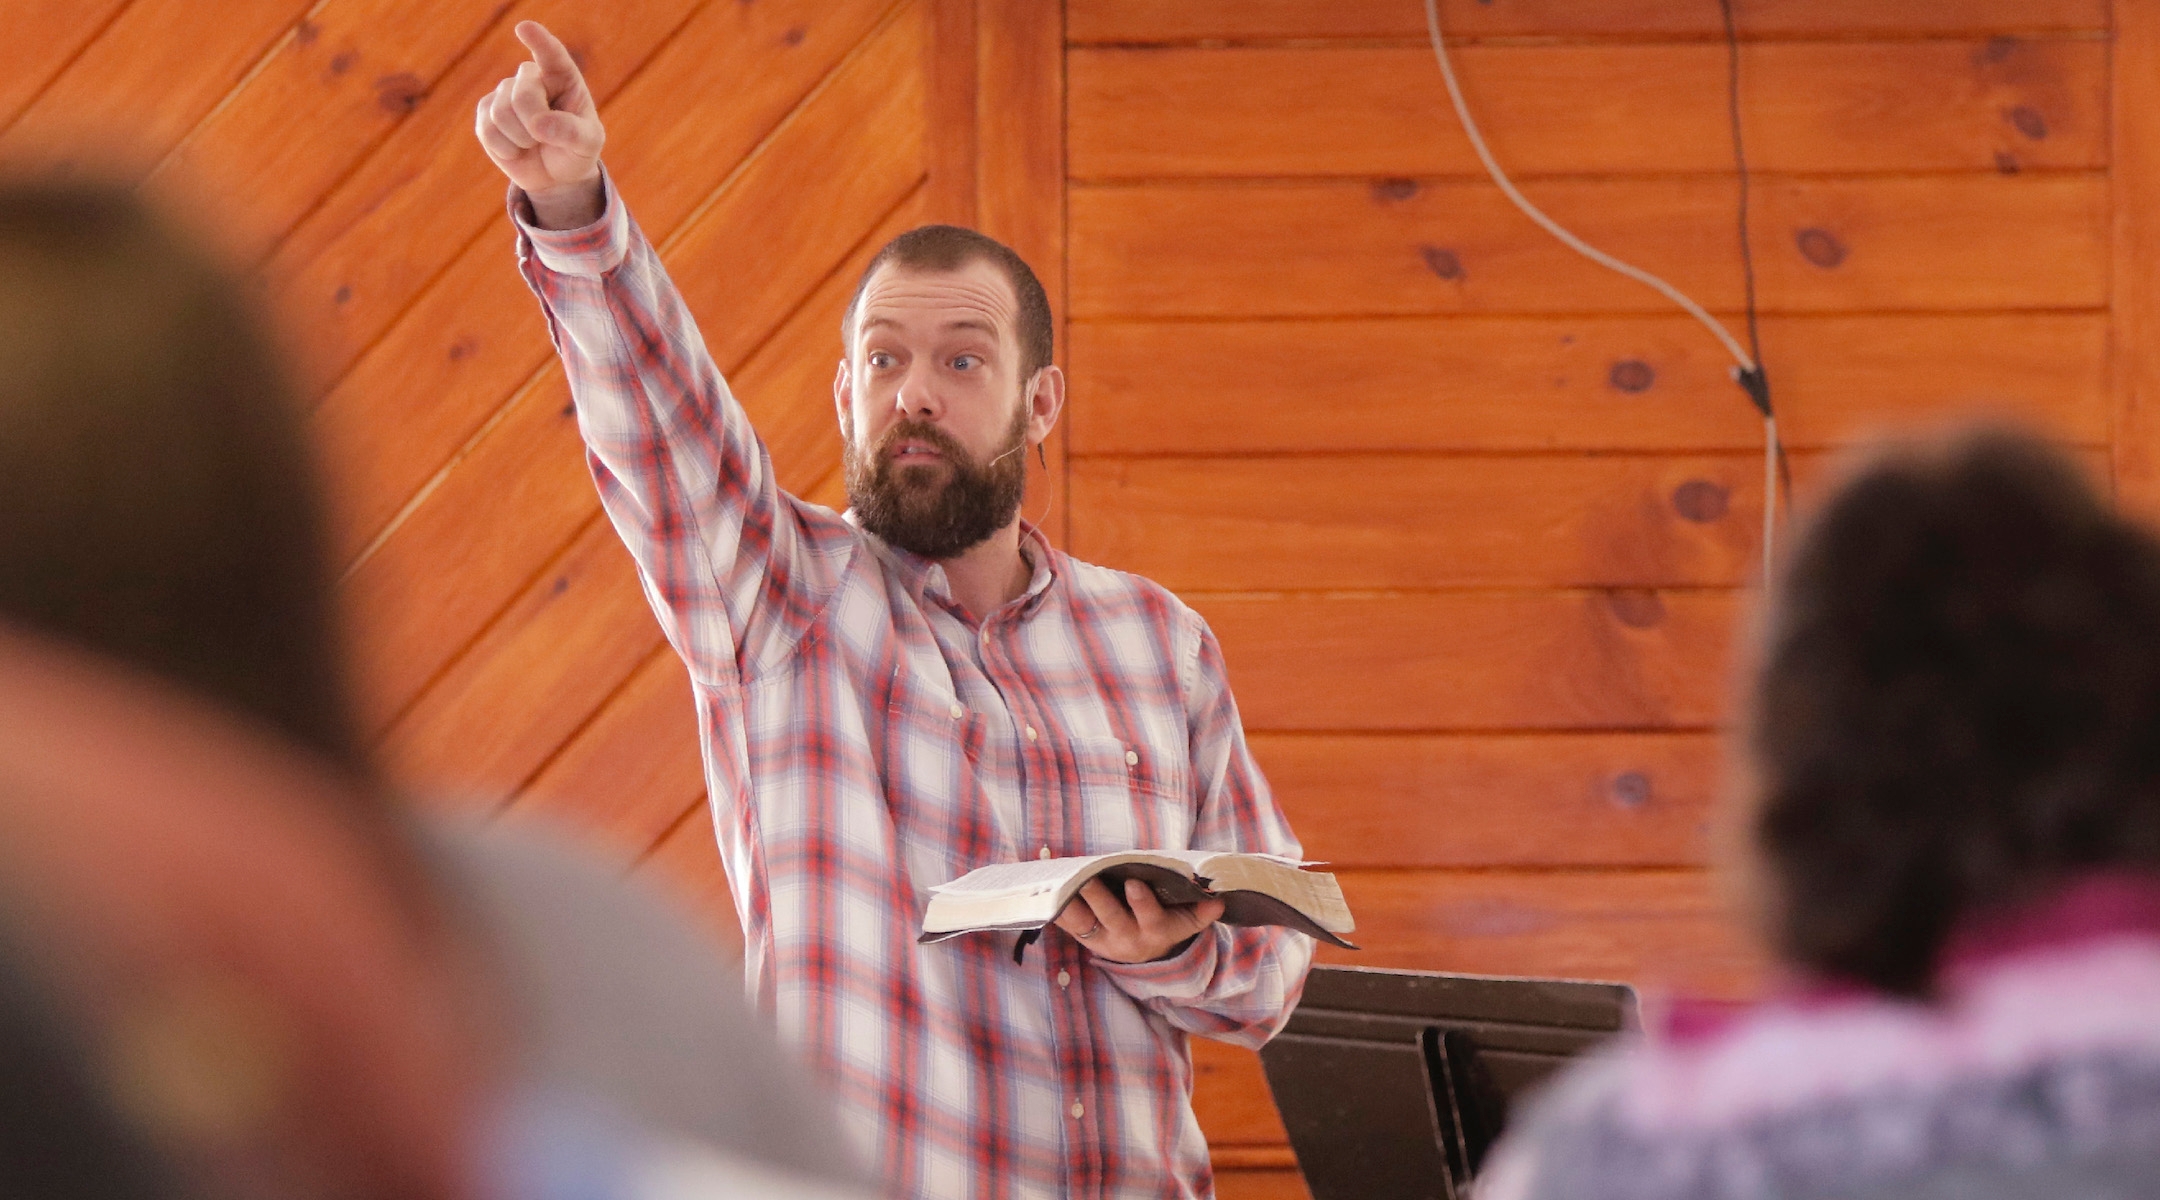 Pastor Aaron Dudley leads a service at the Machias Christian Fellowship church in Machias, Maine on Sunday, February 19, 2017. (Gregory Rec/Getty Images)